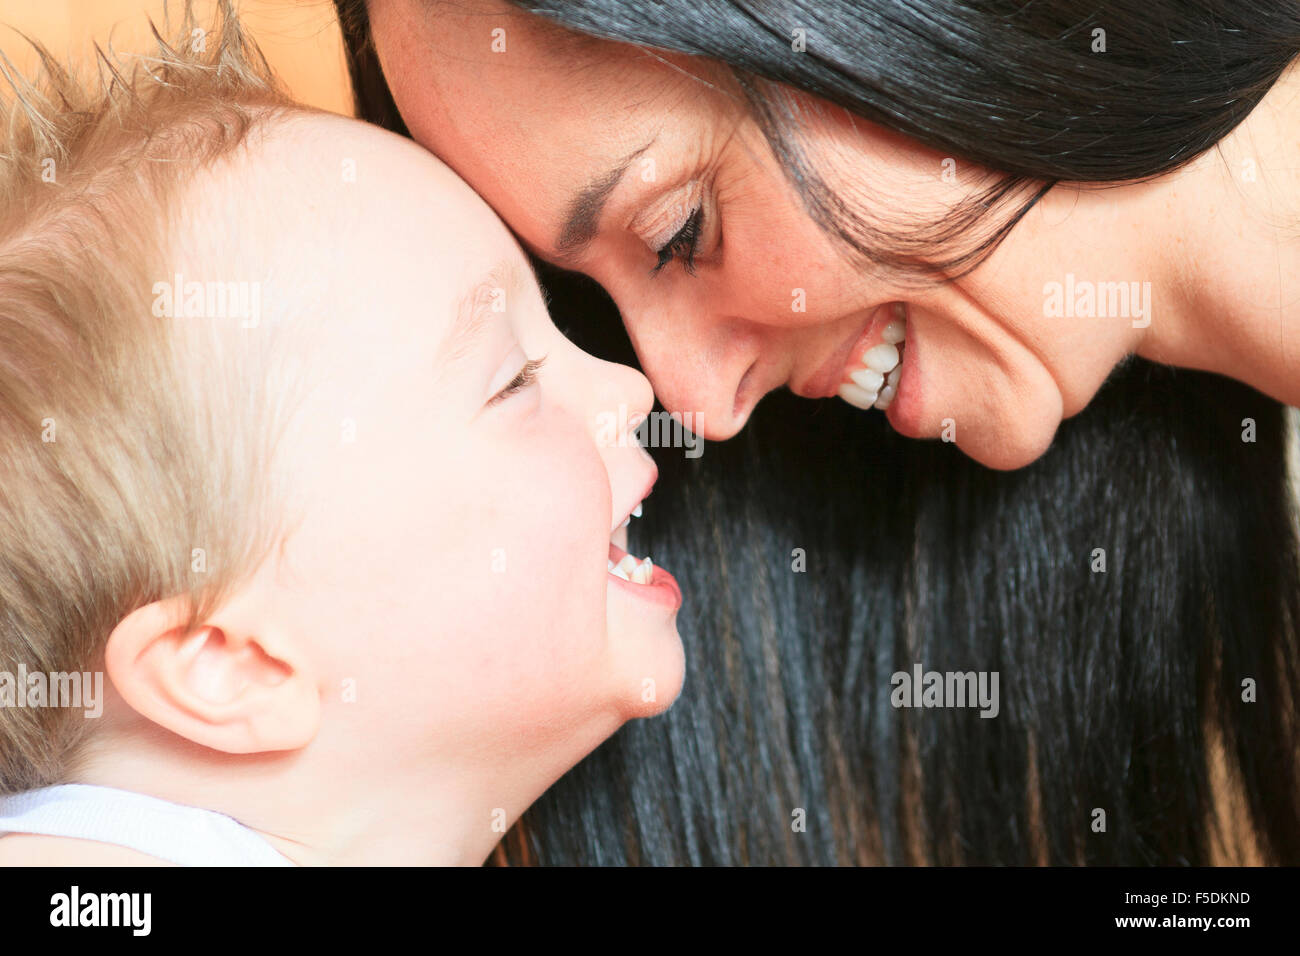 Happy 2 years old baby boy. Kid is smiling, grinning. Stock Photo